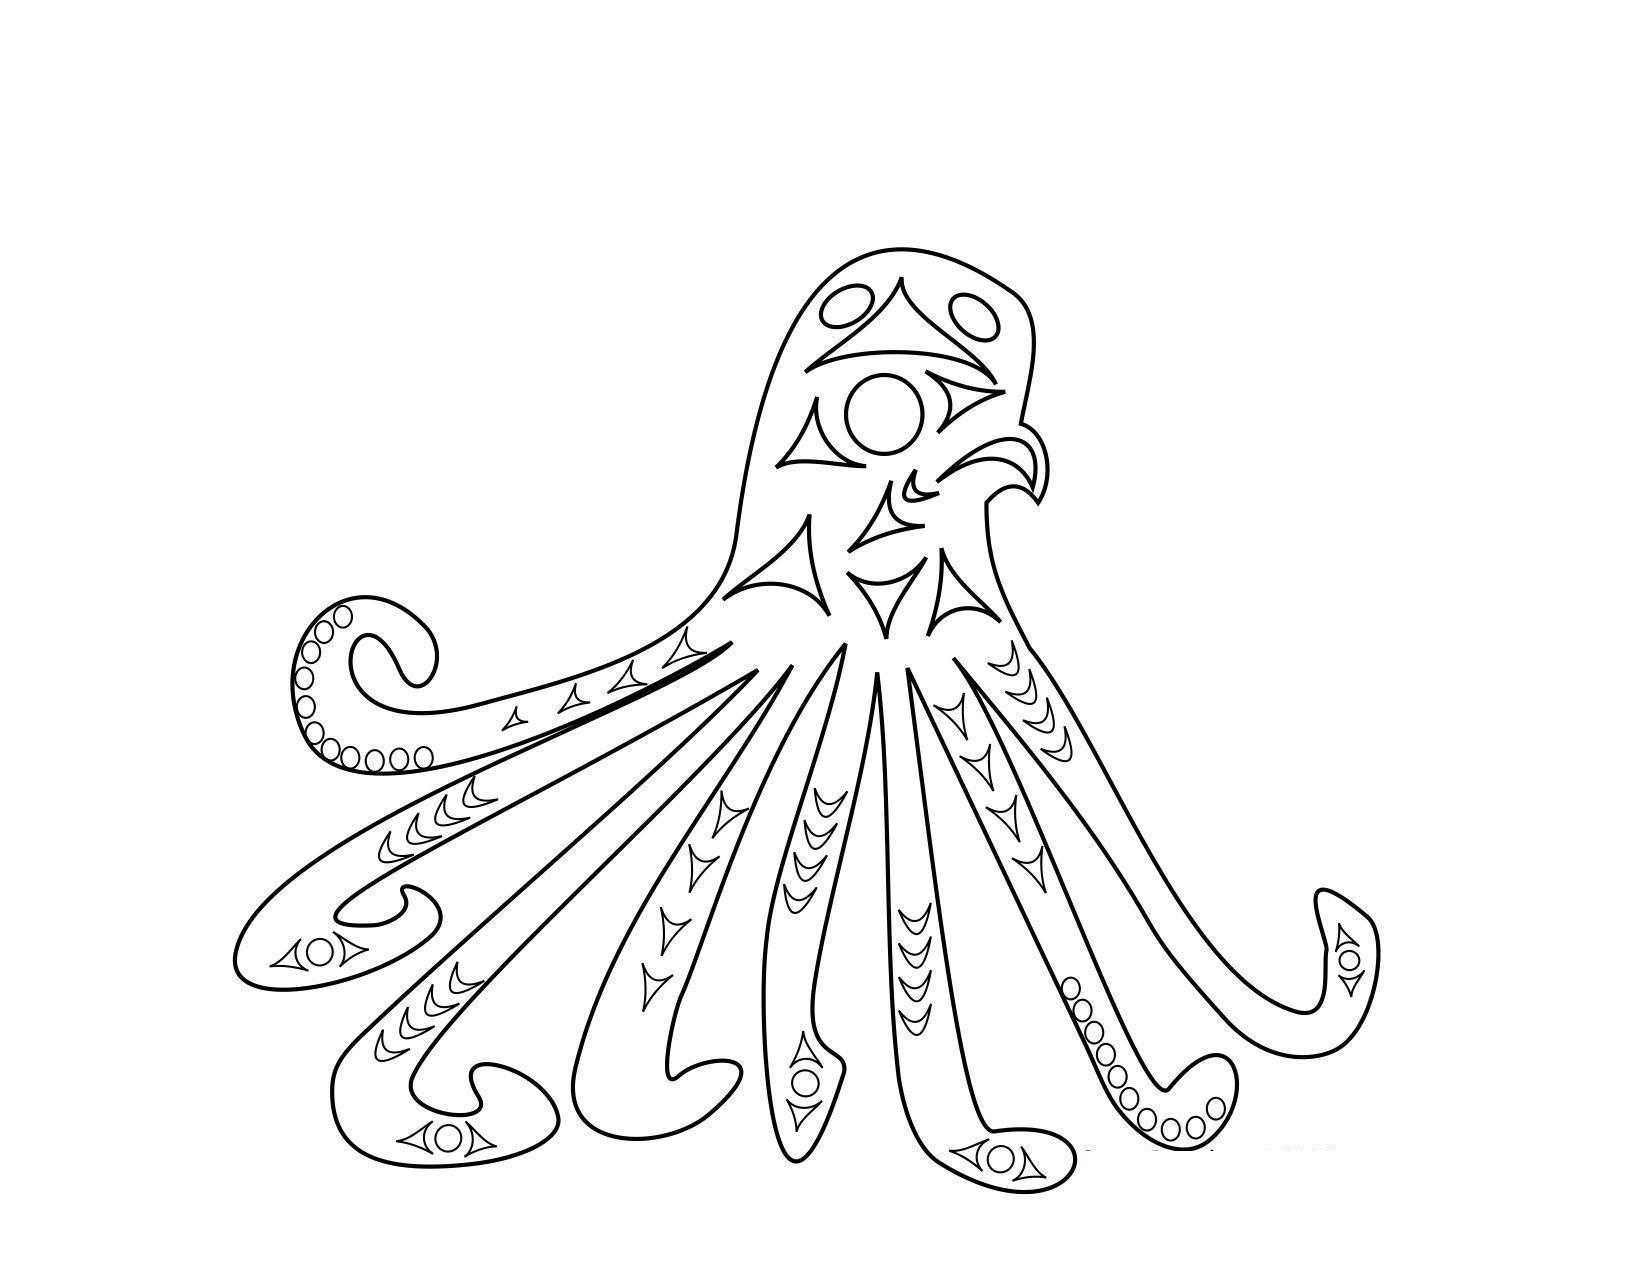 Coloring Octopus with a bird head. Category Animals. Tags:  octopus.